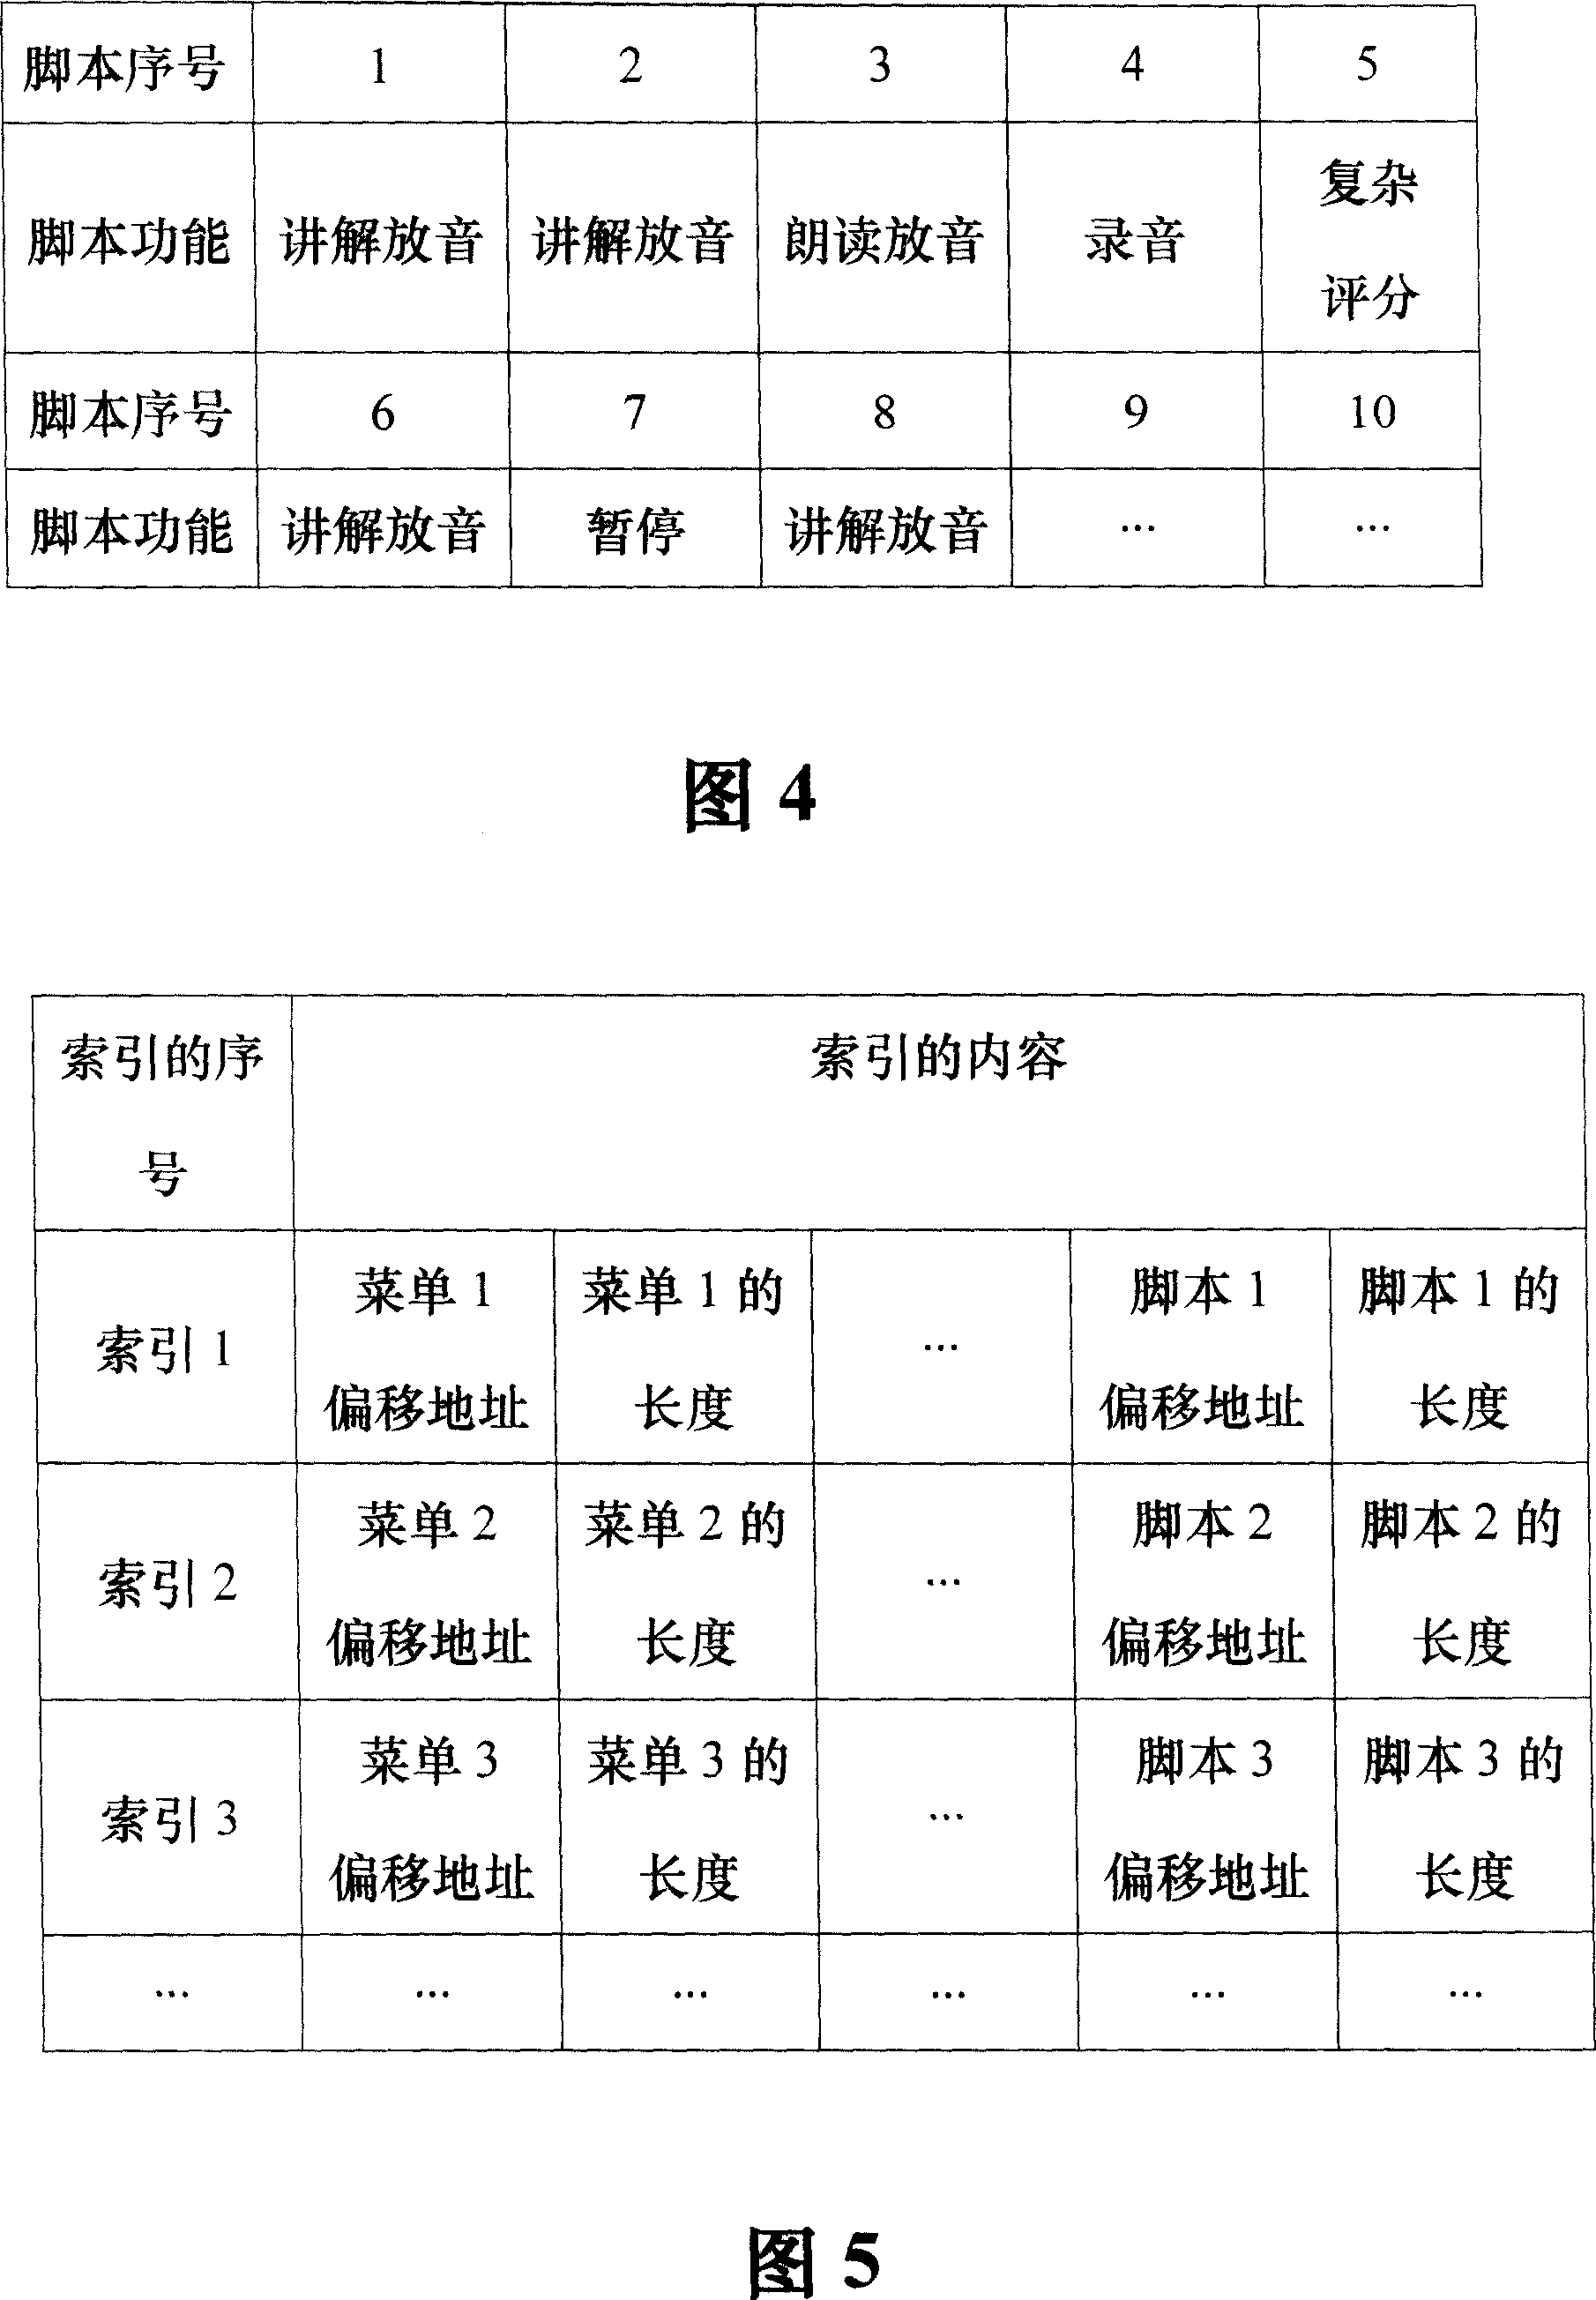 Embedded type language teaching machine with pronunciation quality evaluation